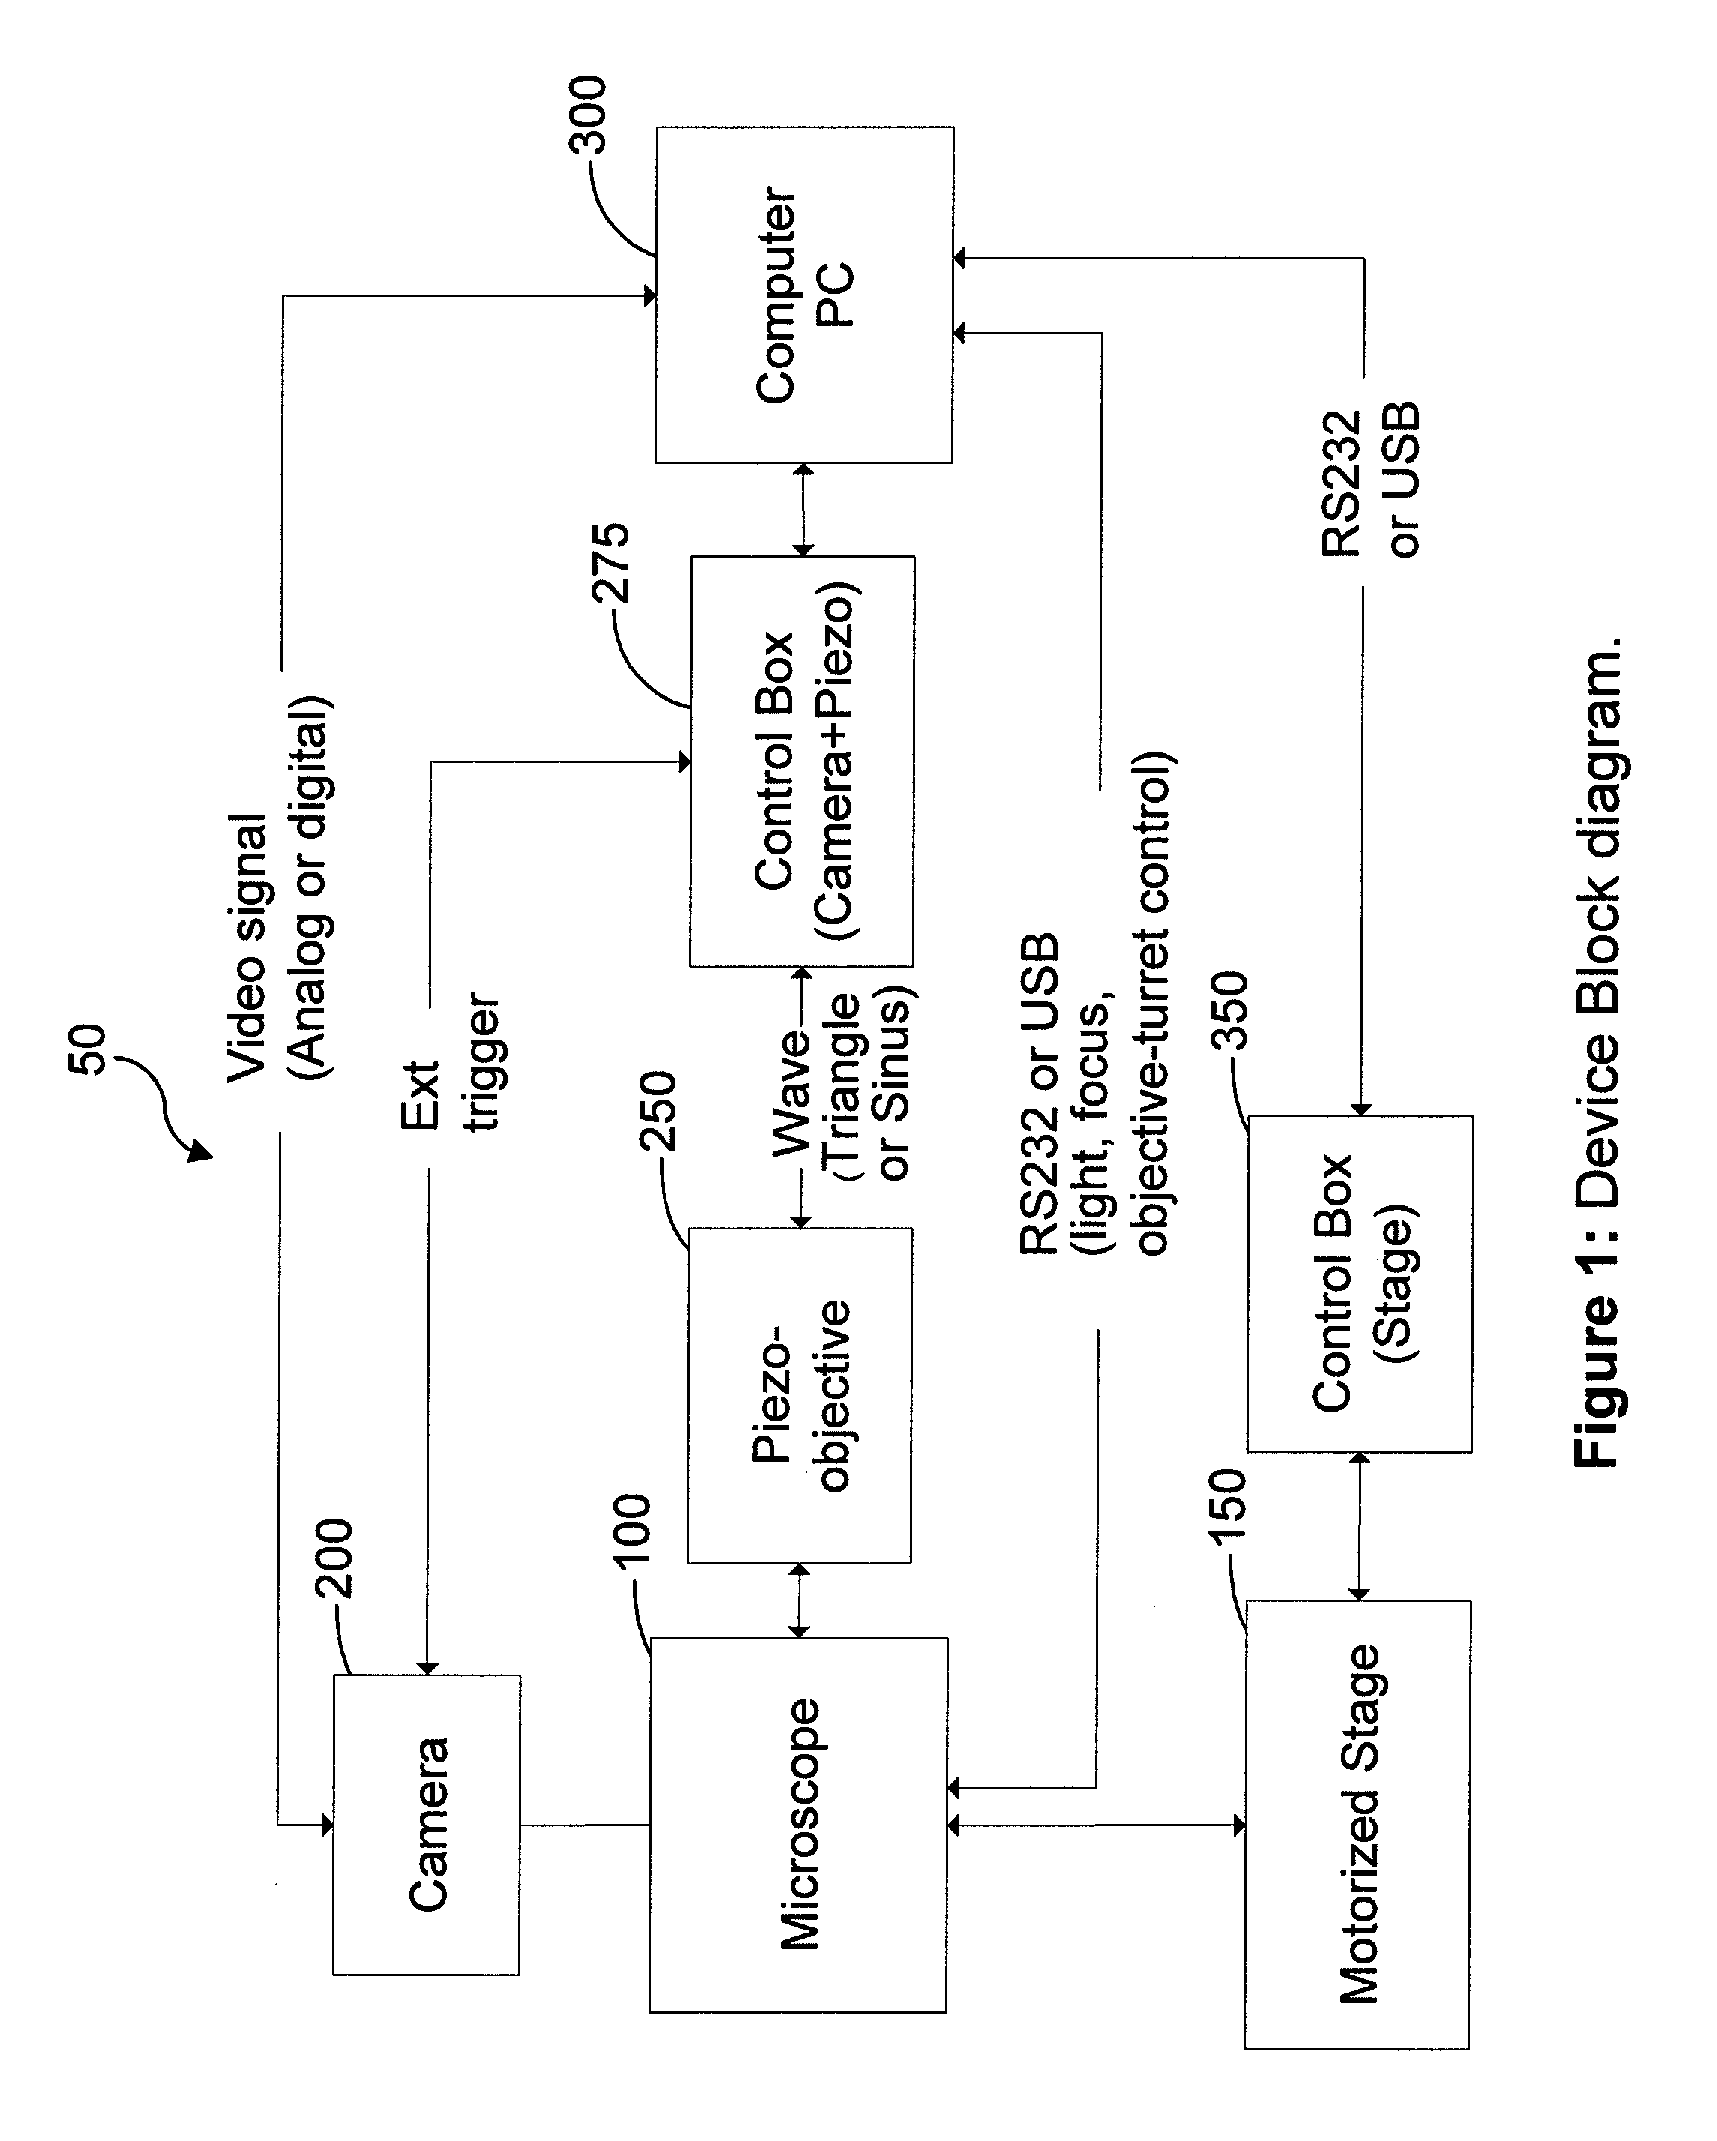 Apparatus and Method for Rapid Microscope Image Focusing